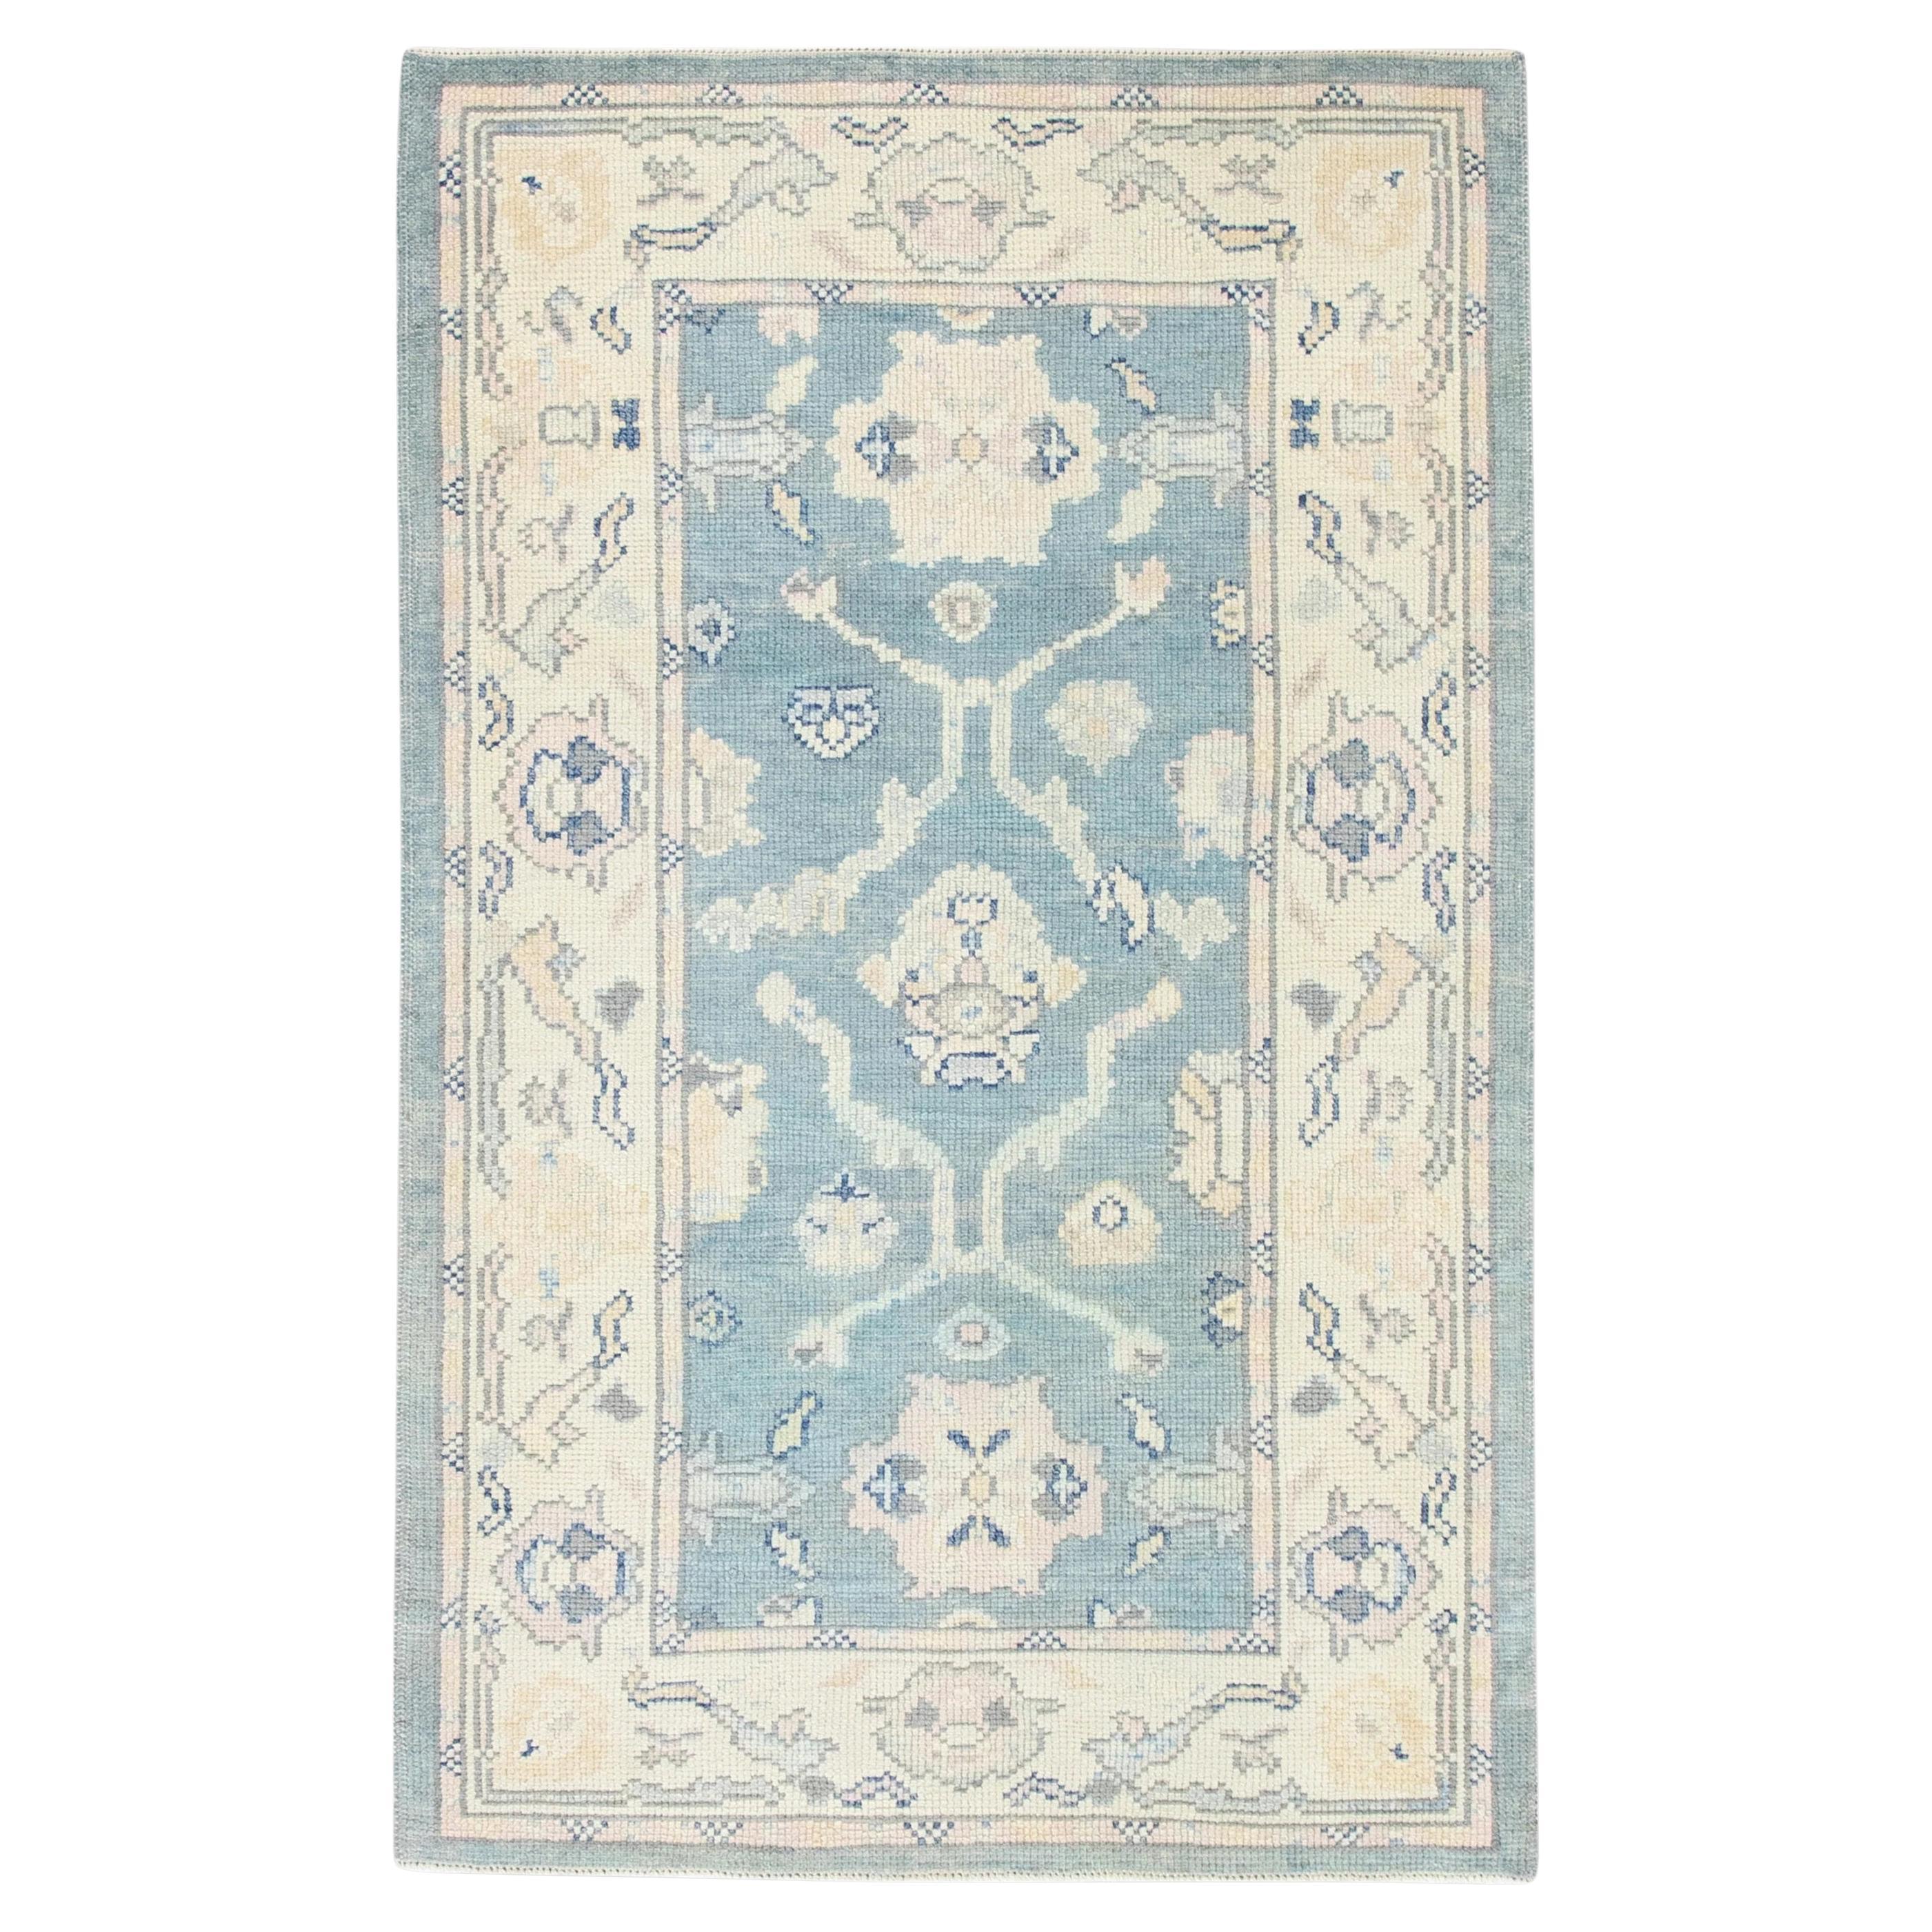 Handwoven Wool Turkish Oushak Rug in Blue Floral Design 3' x 4'10" For Sale